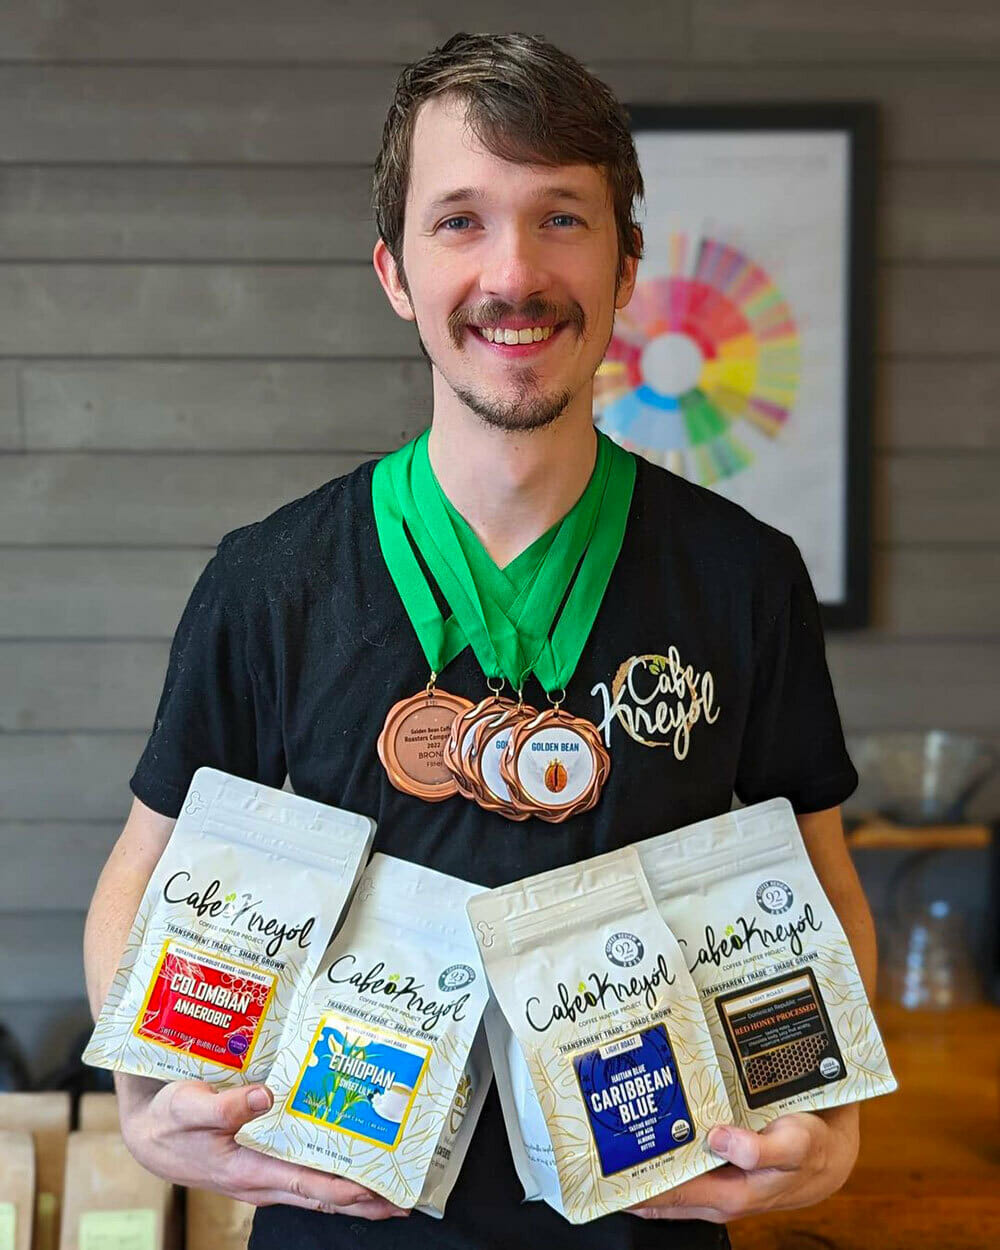 Someone wearing several medals while holding various bags of their own roasted coffee.